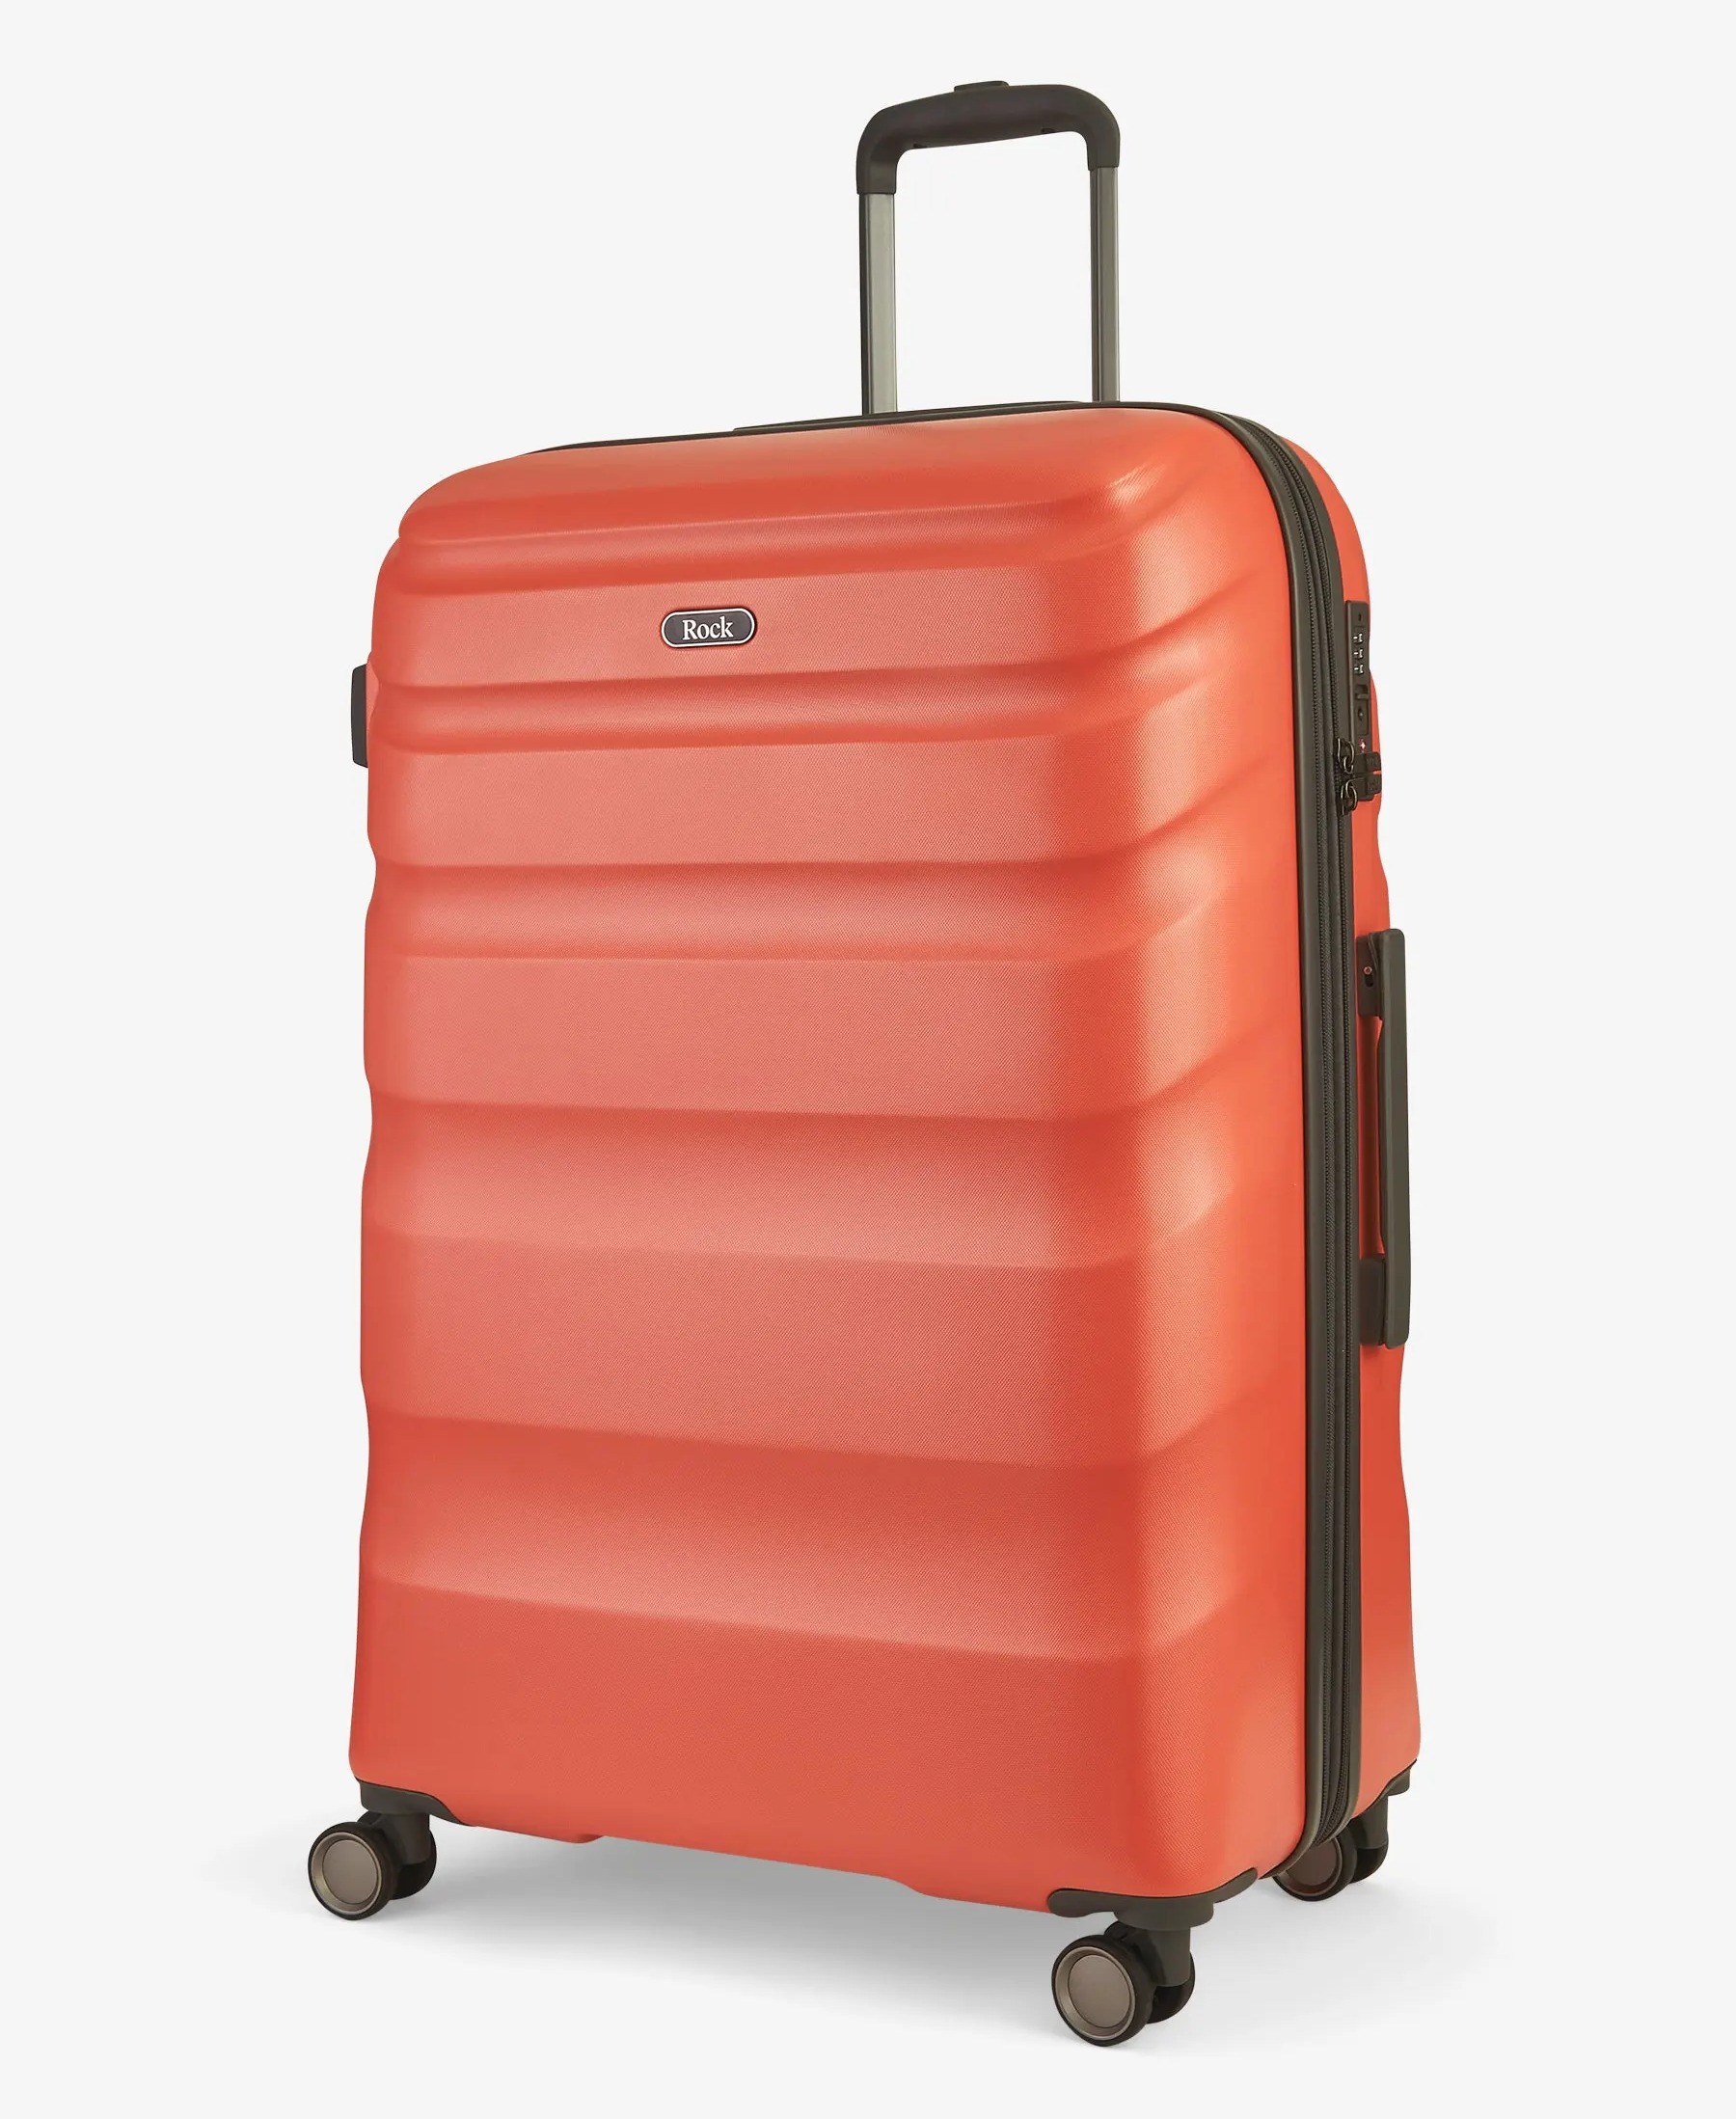 This Bali large suitcase is £99.99, at Rockluggage.com